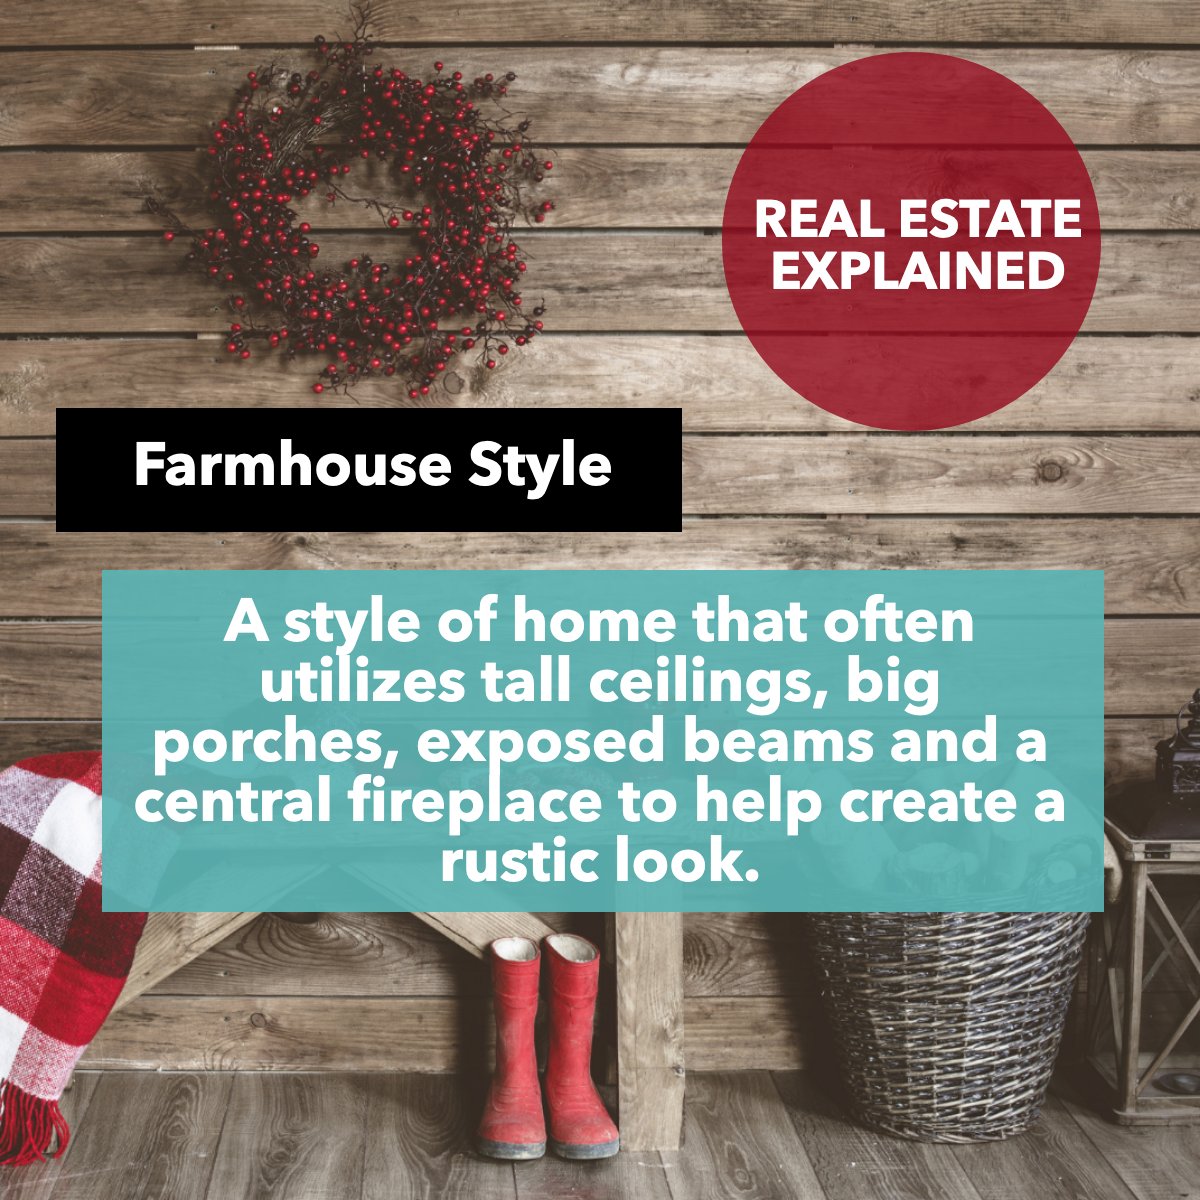 Did you know what a Farmhouse Style is? 🏡

Is this the type of house that you like?

#farmhousestylehome #farmhousestyledesign #farmhousestyleinspired #farmhouseismystyle
 #washingtonrealestate #washingtonrealtor #swwashingtonrealestate #sellinghomes #buyinghomes